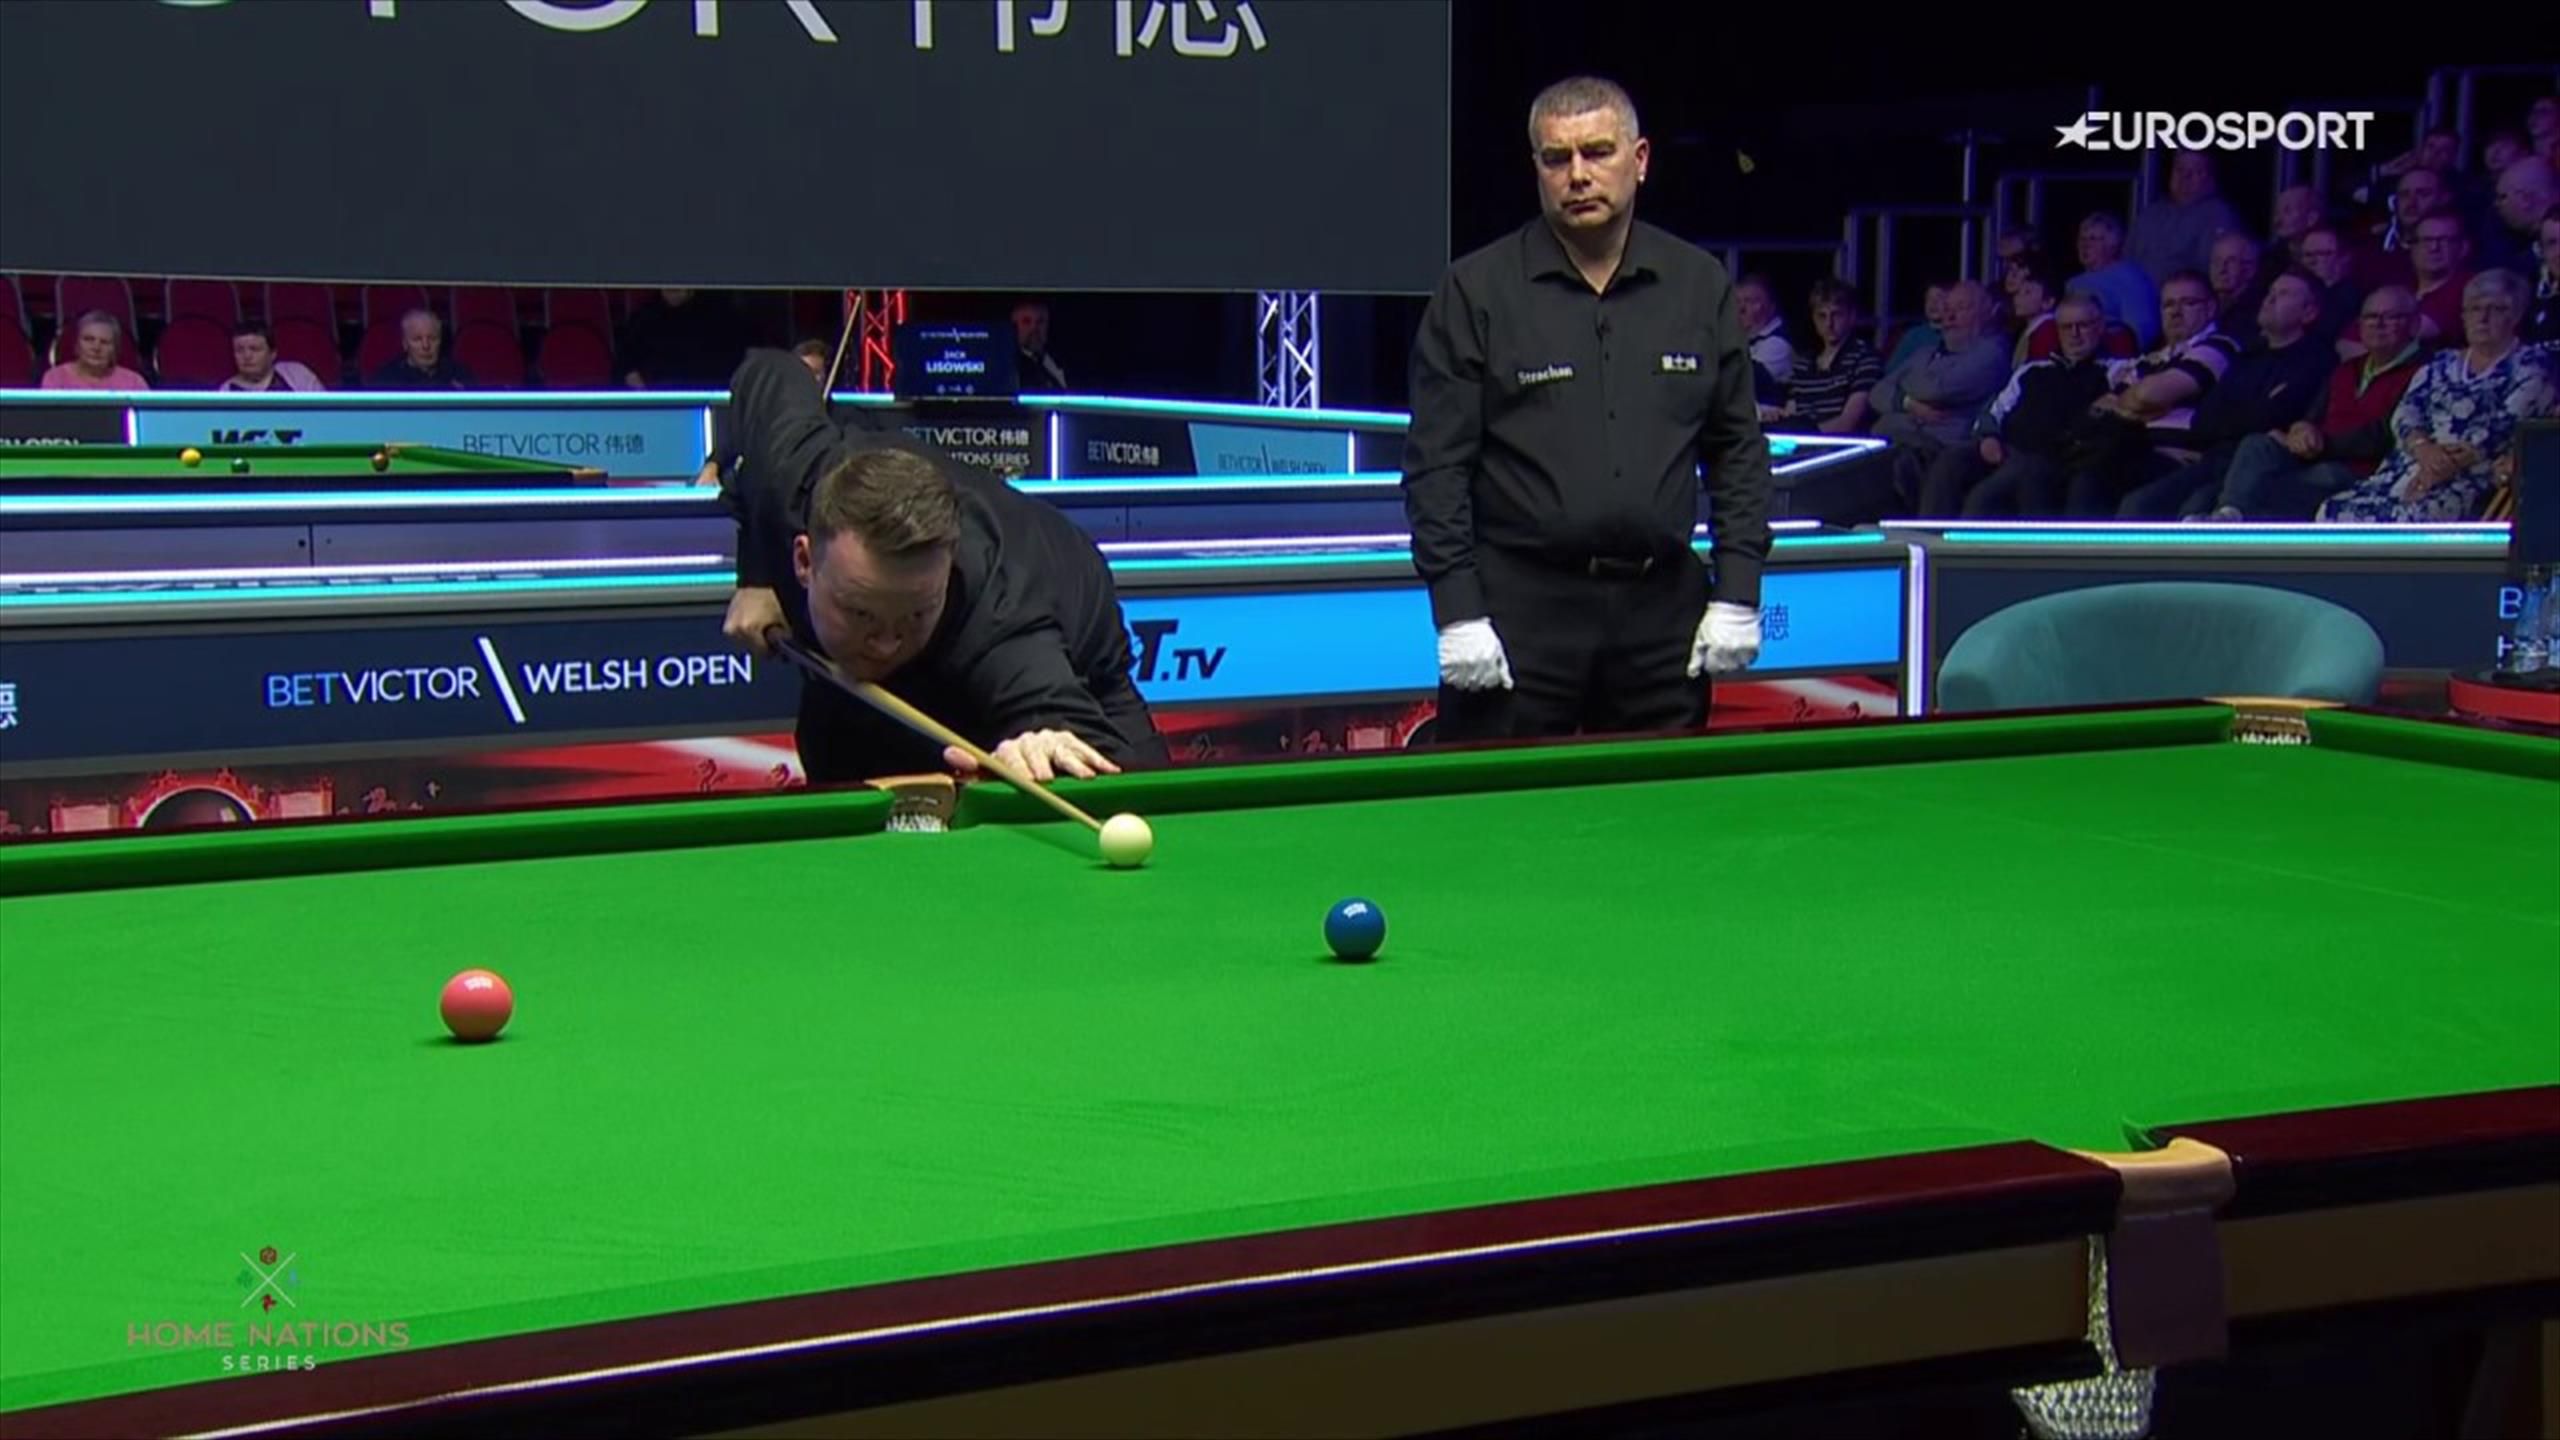 Everything is spot on, inch perfect - Shaun Murphy makes 145 break against Daniel Wells - Snooker video